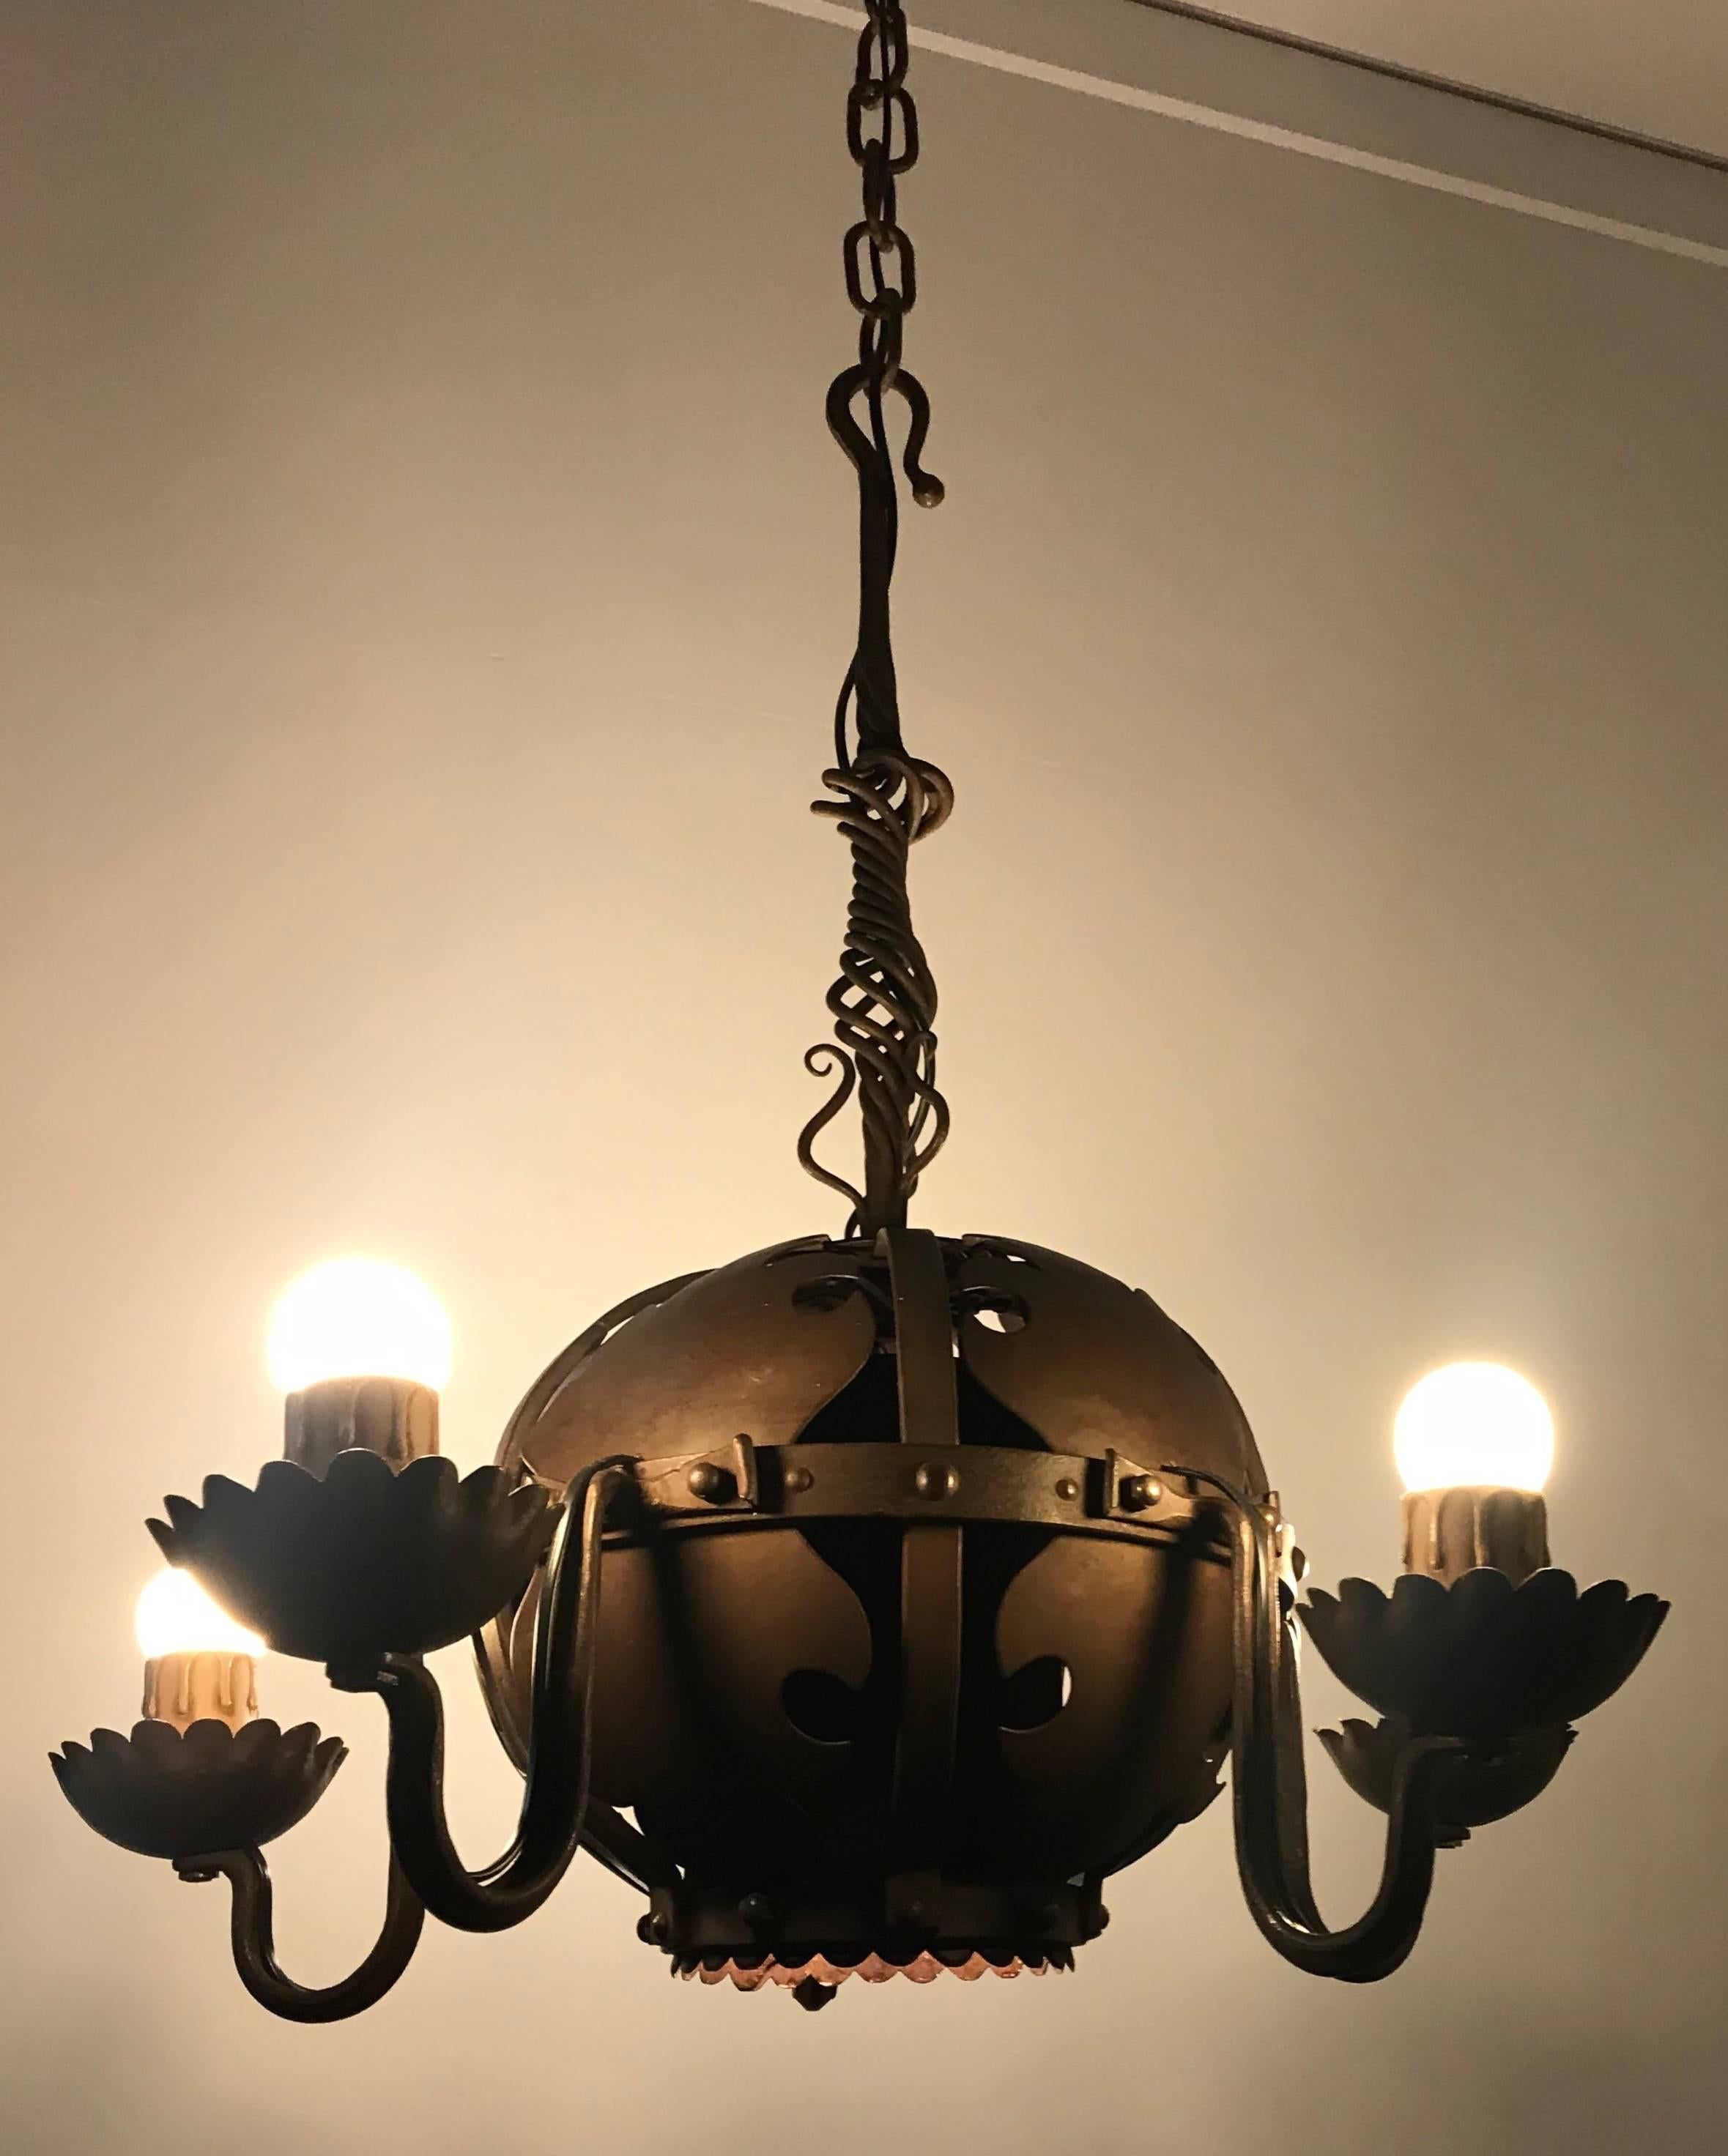 Rare design and quality crafted chandelier.

This artistic work of blacksmith lighting art is an absolute joy to watch and it is in excellent condition. The artistic details above and within the spherical centre definitely lifts it above the average